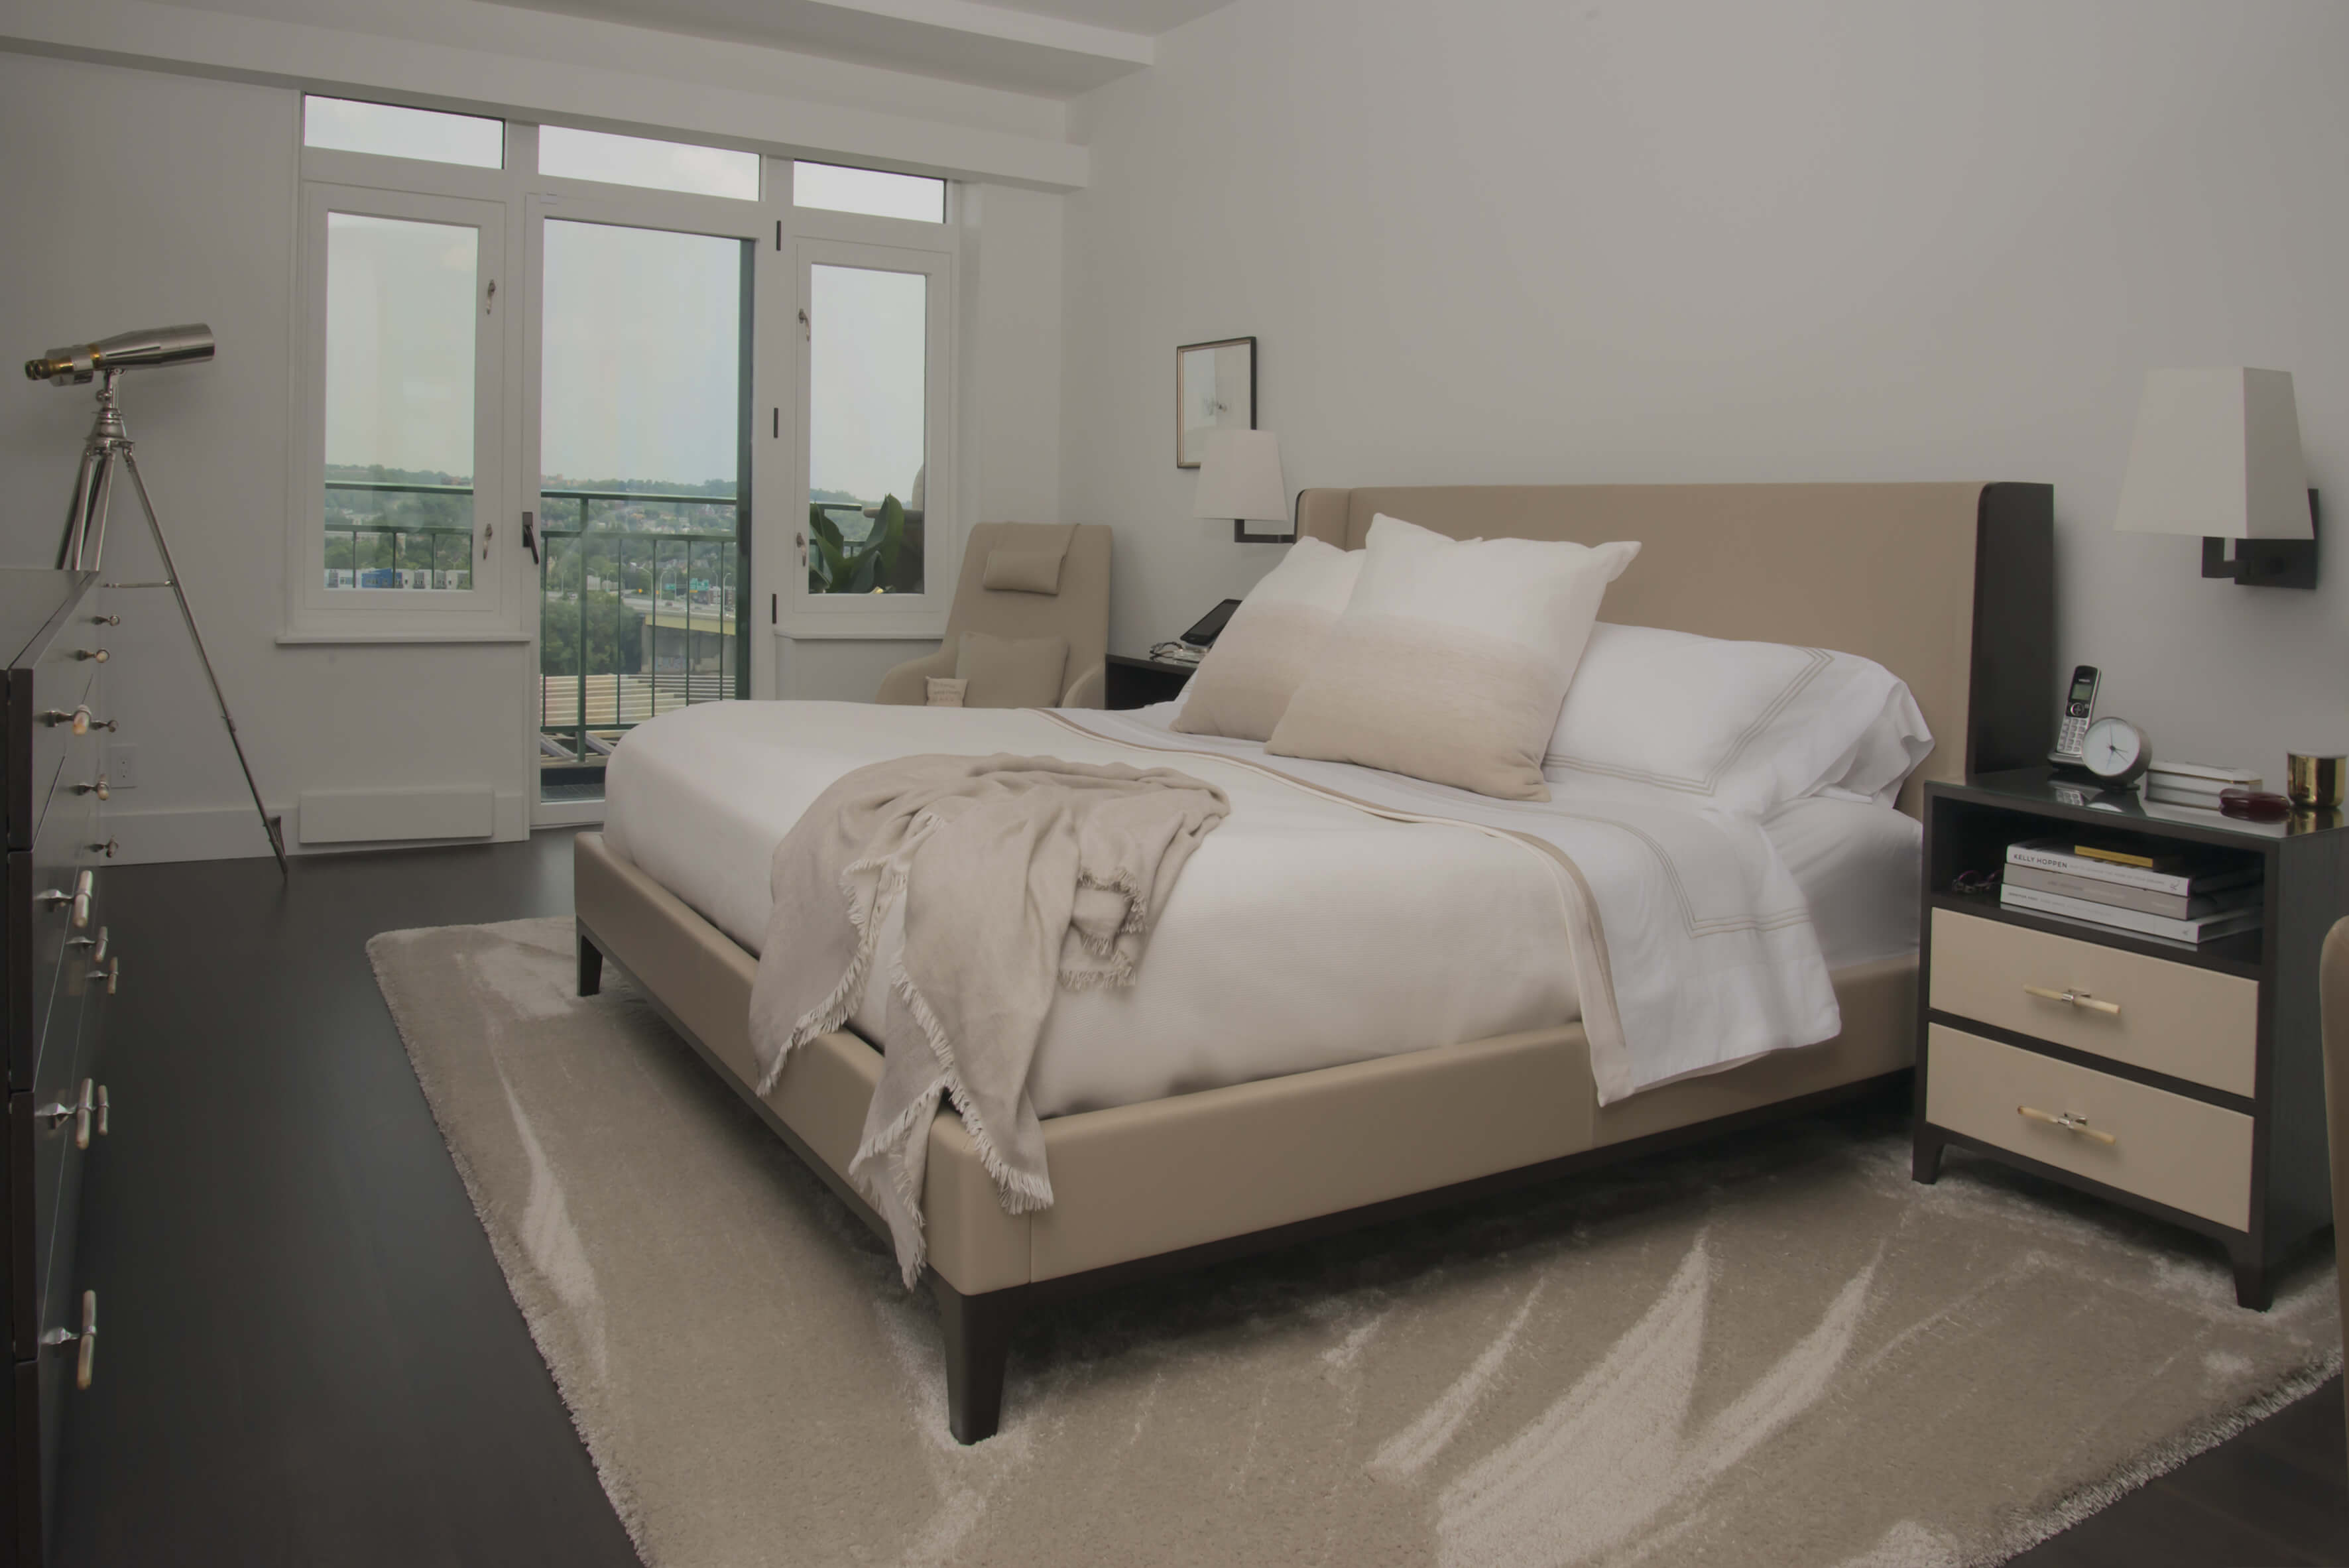 Sophisticated and cozy modern bedroom with warm tones designed by interior designer, RM Interiors.